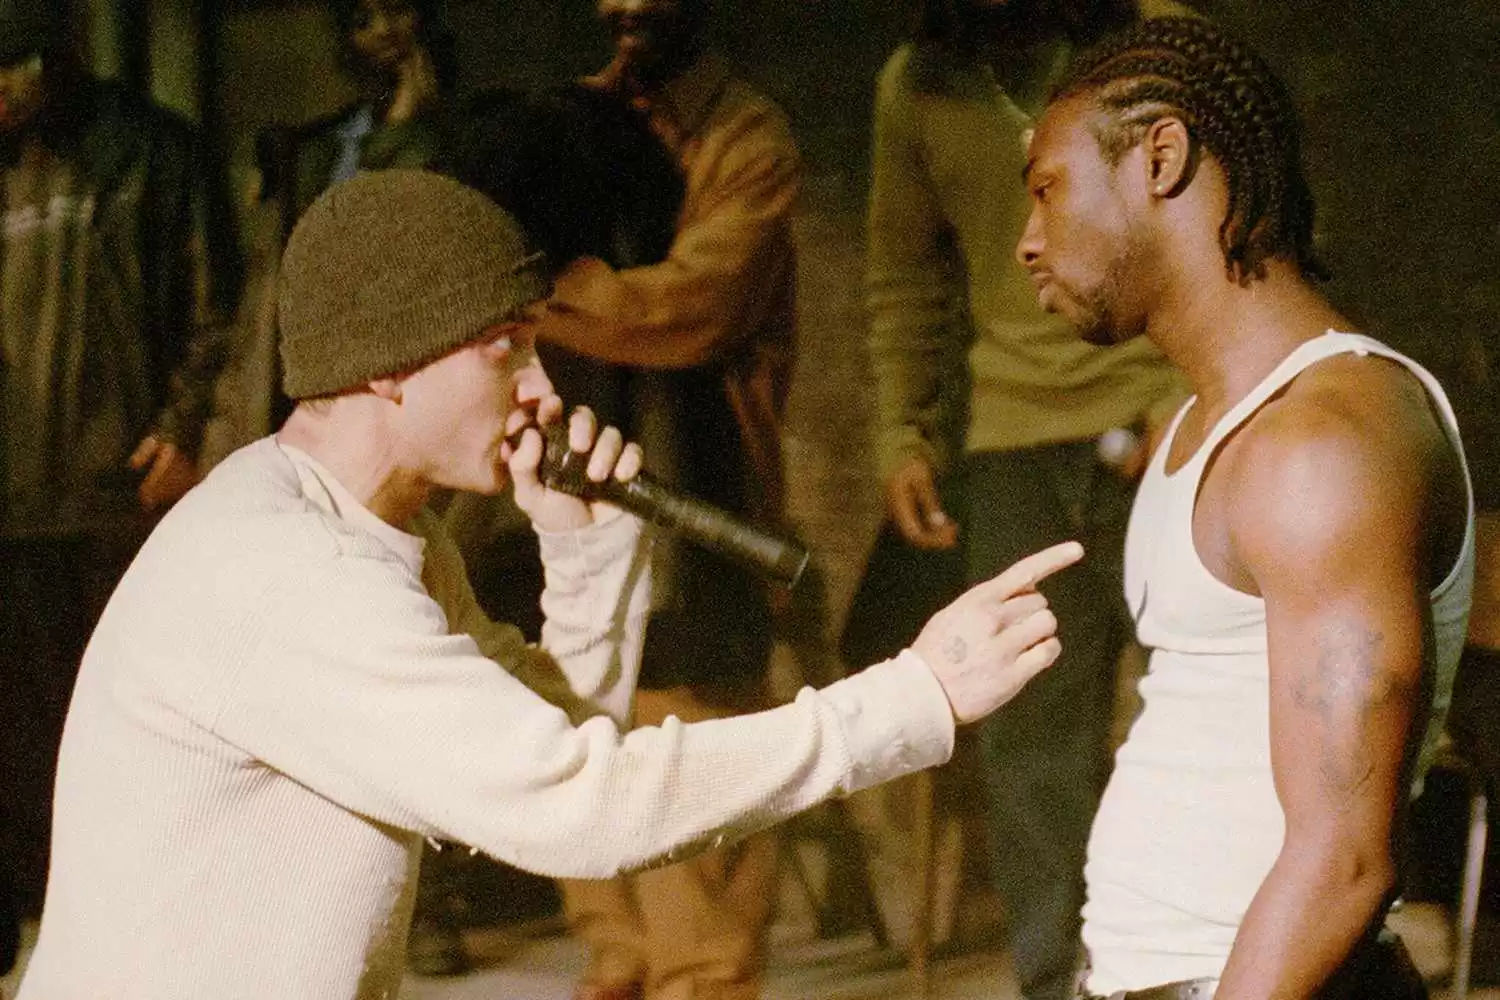 Nashawn Breedlove, Rapper and Actor in '8 Mile', Dead at 46